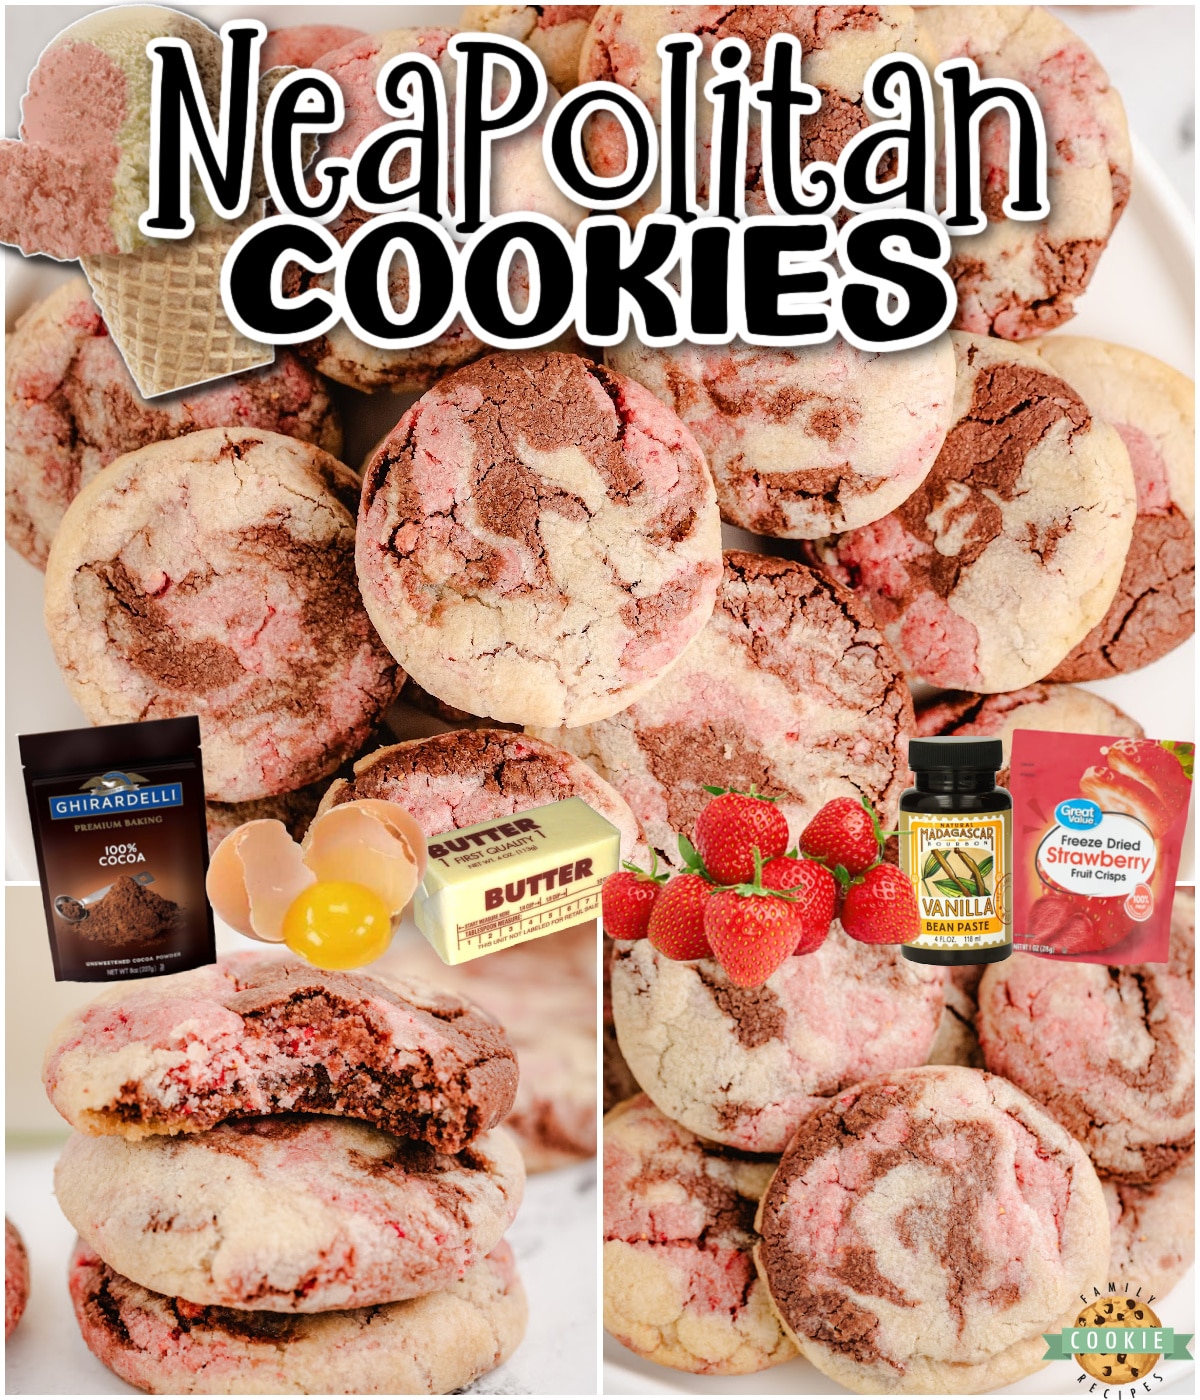 Neapolitan cookies are soft & chewy cookies that combine strawberry, chocolate & vanilla flavors, just like the popular ice cream flavor!